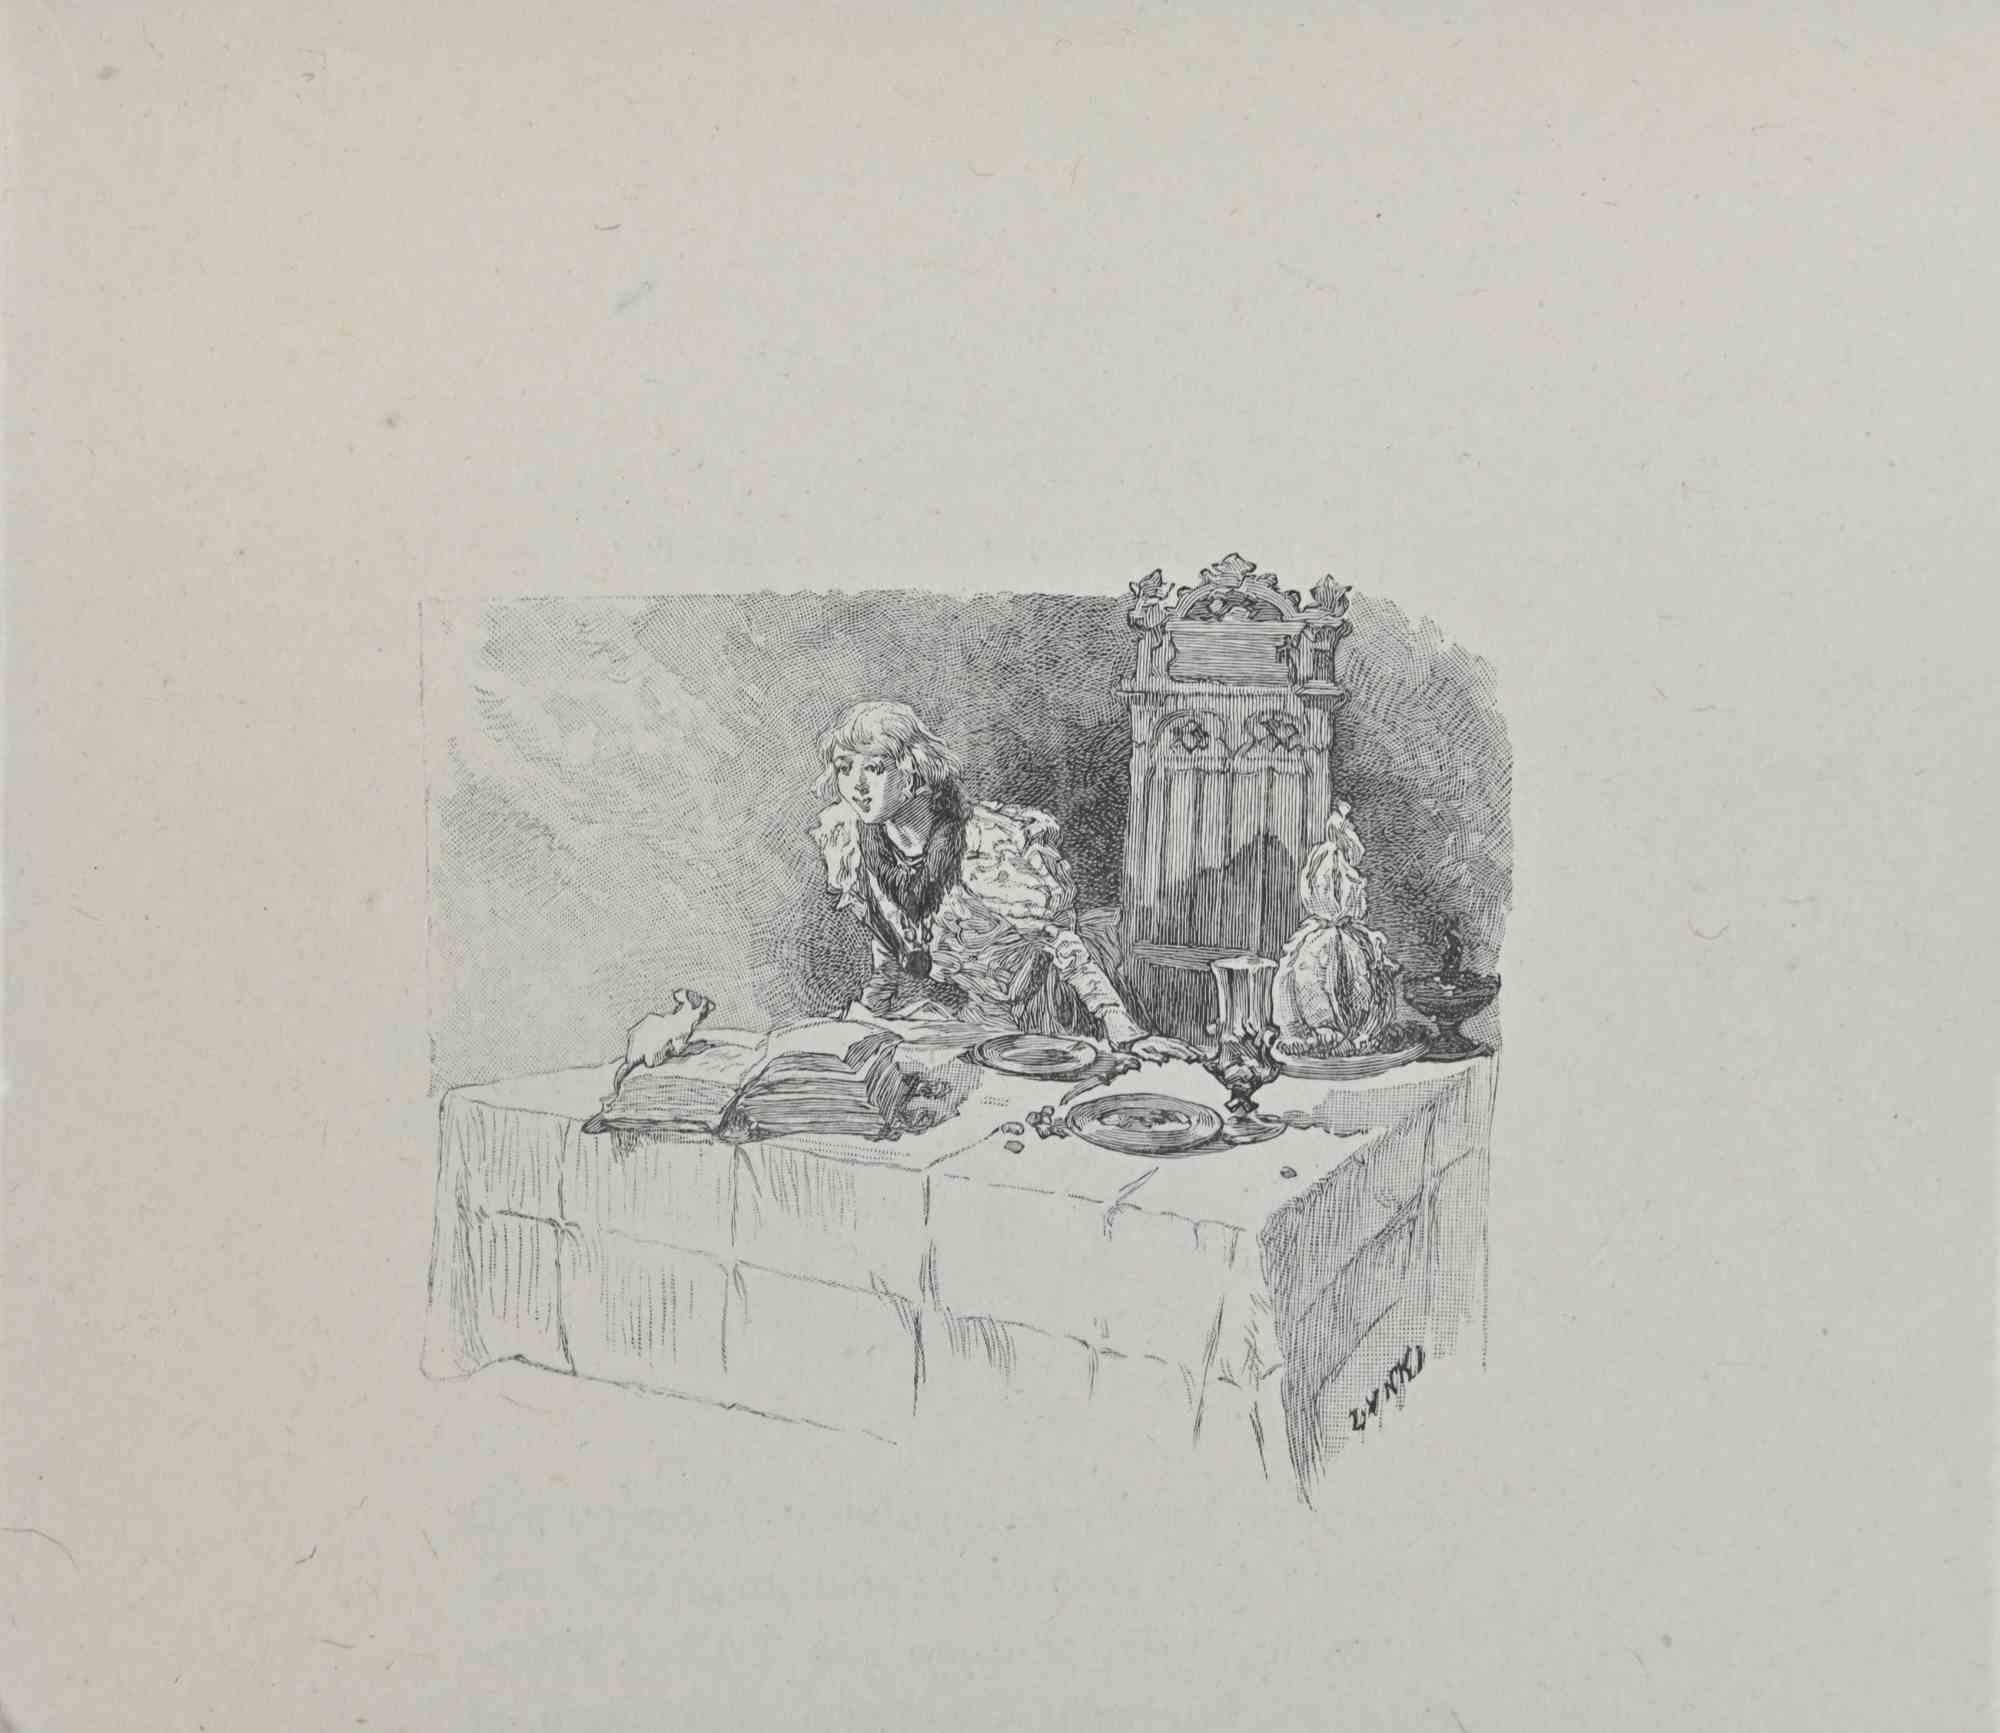 Petits Contes à ma Sœur is a Lithograph on paper realized by Hégésippe Moreau, dated 1838.

The artwork  is in good condition.

Hégésippe Moreau (1810-1838) was a French lyric poet. The romantic myth was solidified by the publication of his complete